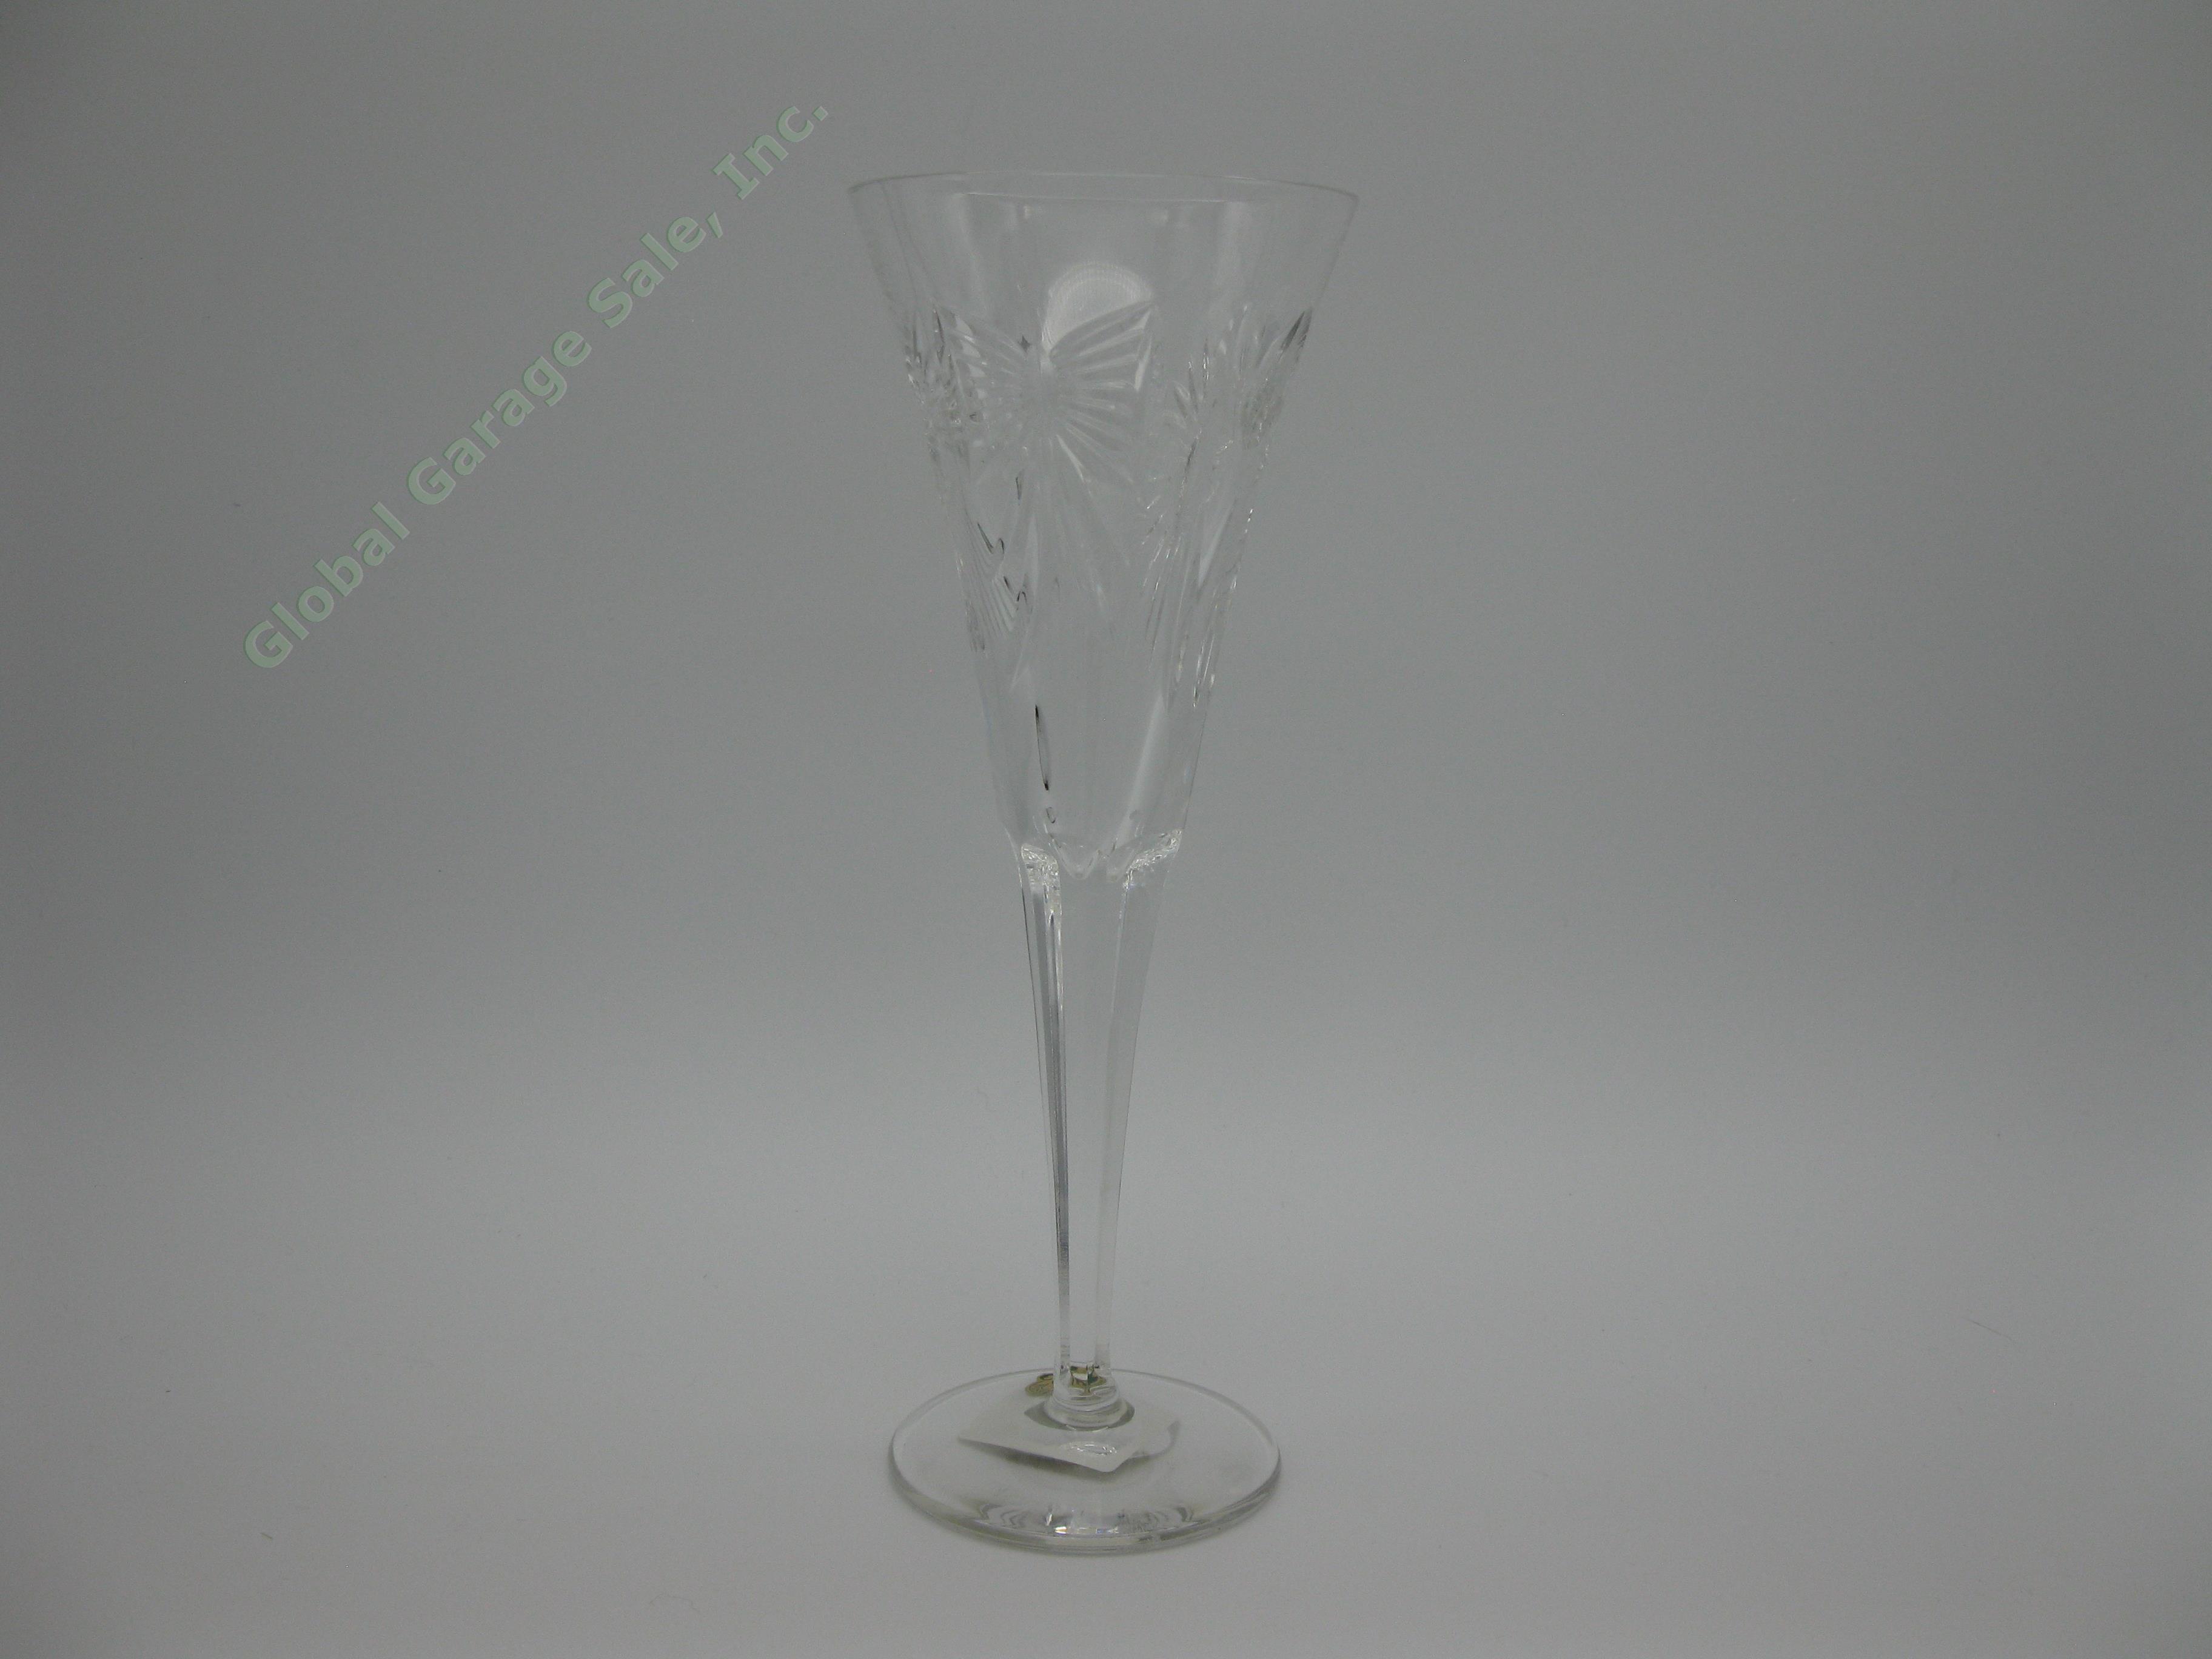 4 Waterford Crystal Millennium Universal-5 Toasting Flute Champagne Glasses NR! 2